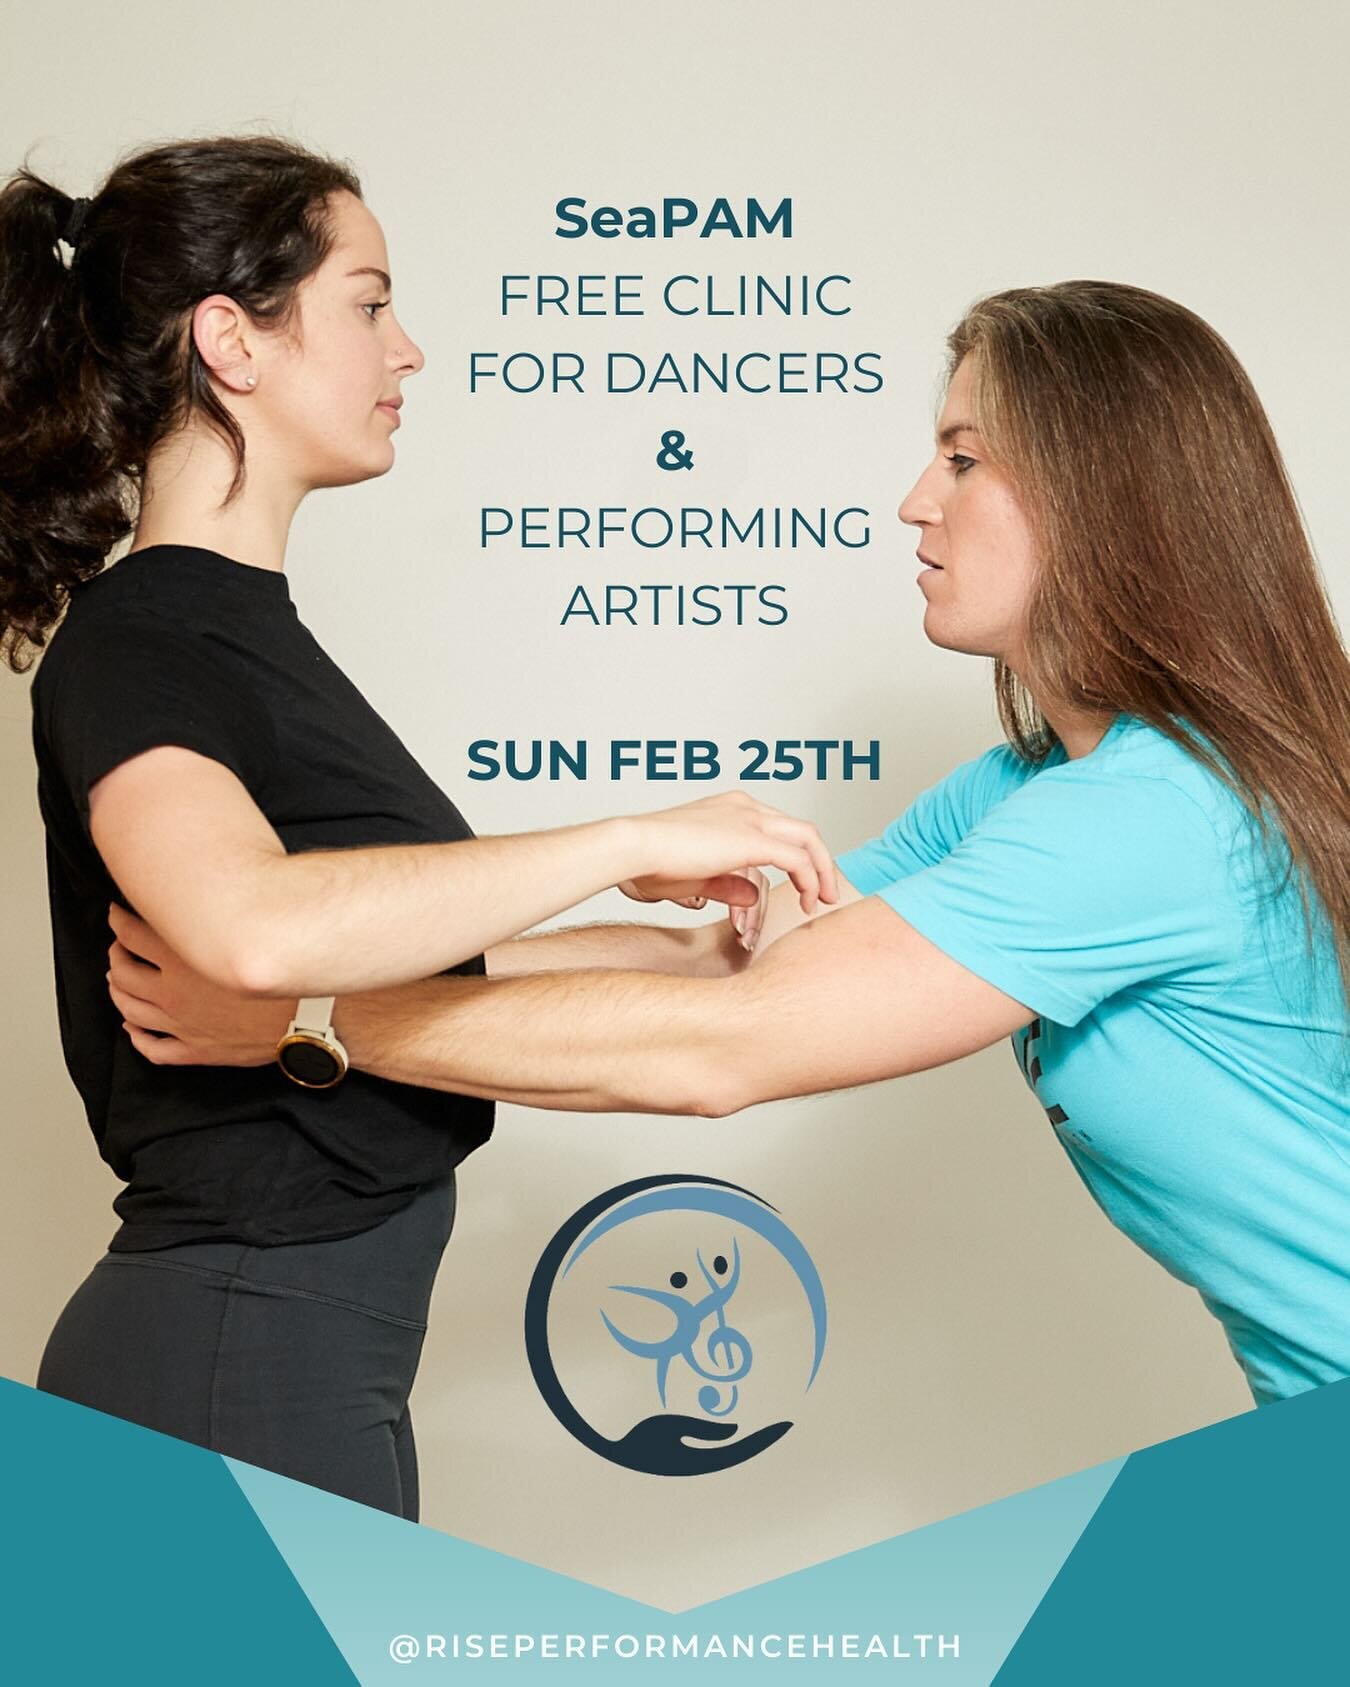 Dancers &amp; Performing Artists, are you struggling with an injury or have some questions about how to improve your dance performance? Sign up for our FREE SeaPAM clinic!
➡️ Link in bio to RISE&rsquo;s new event page for more information.